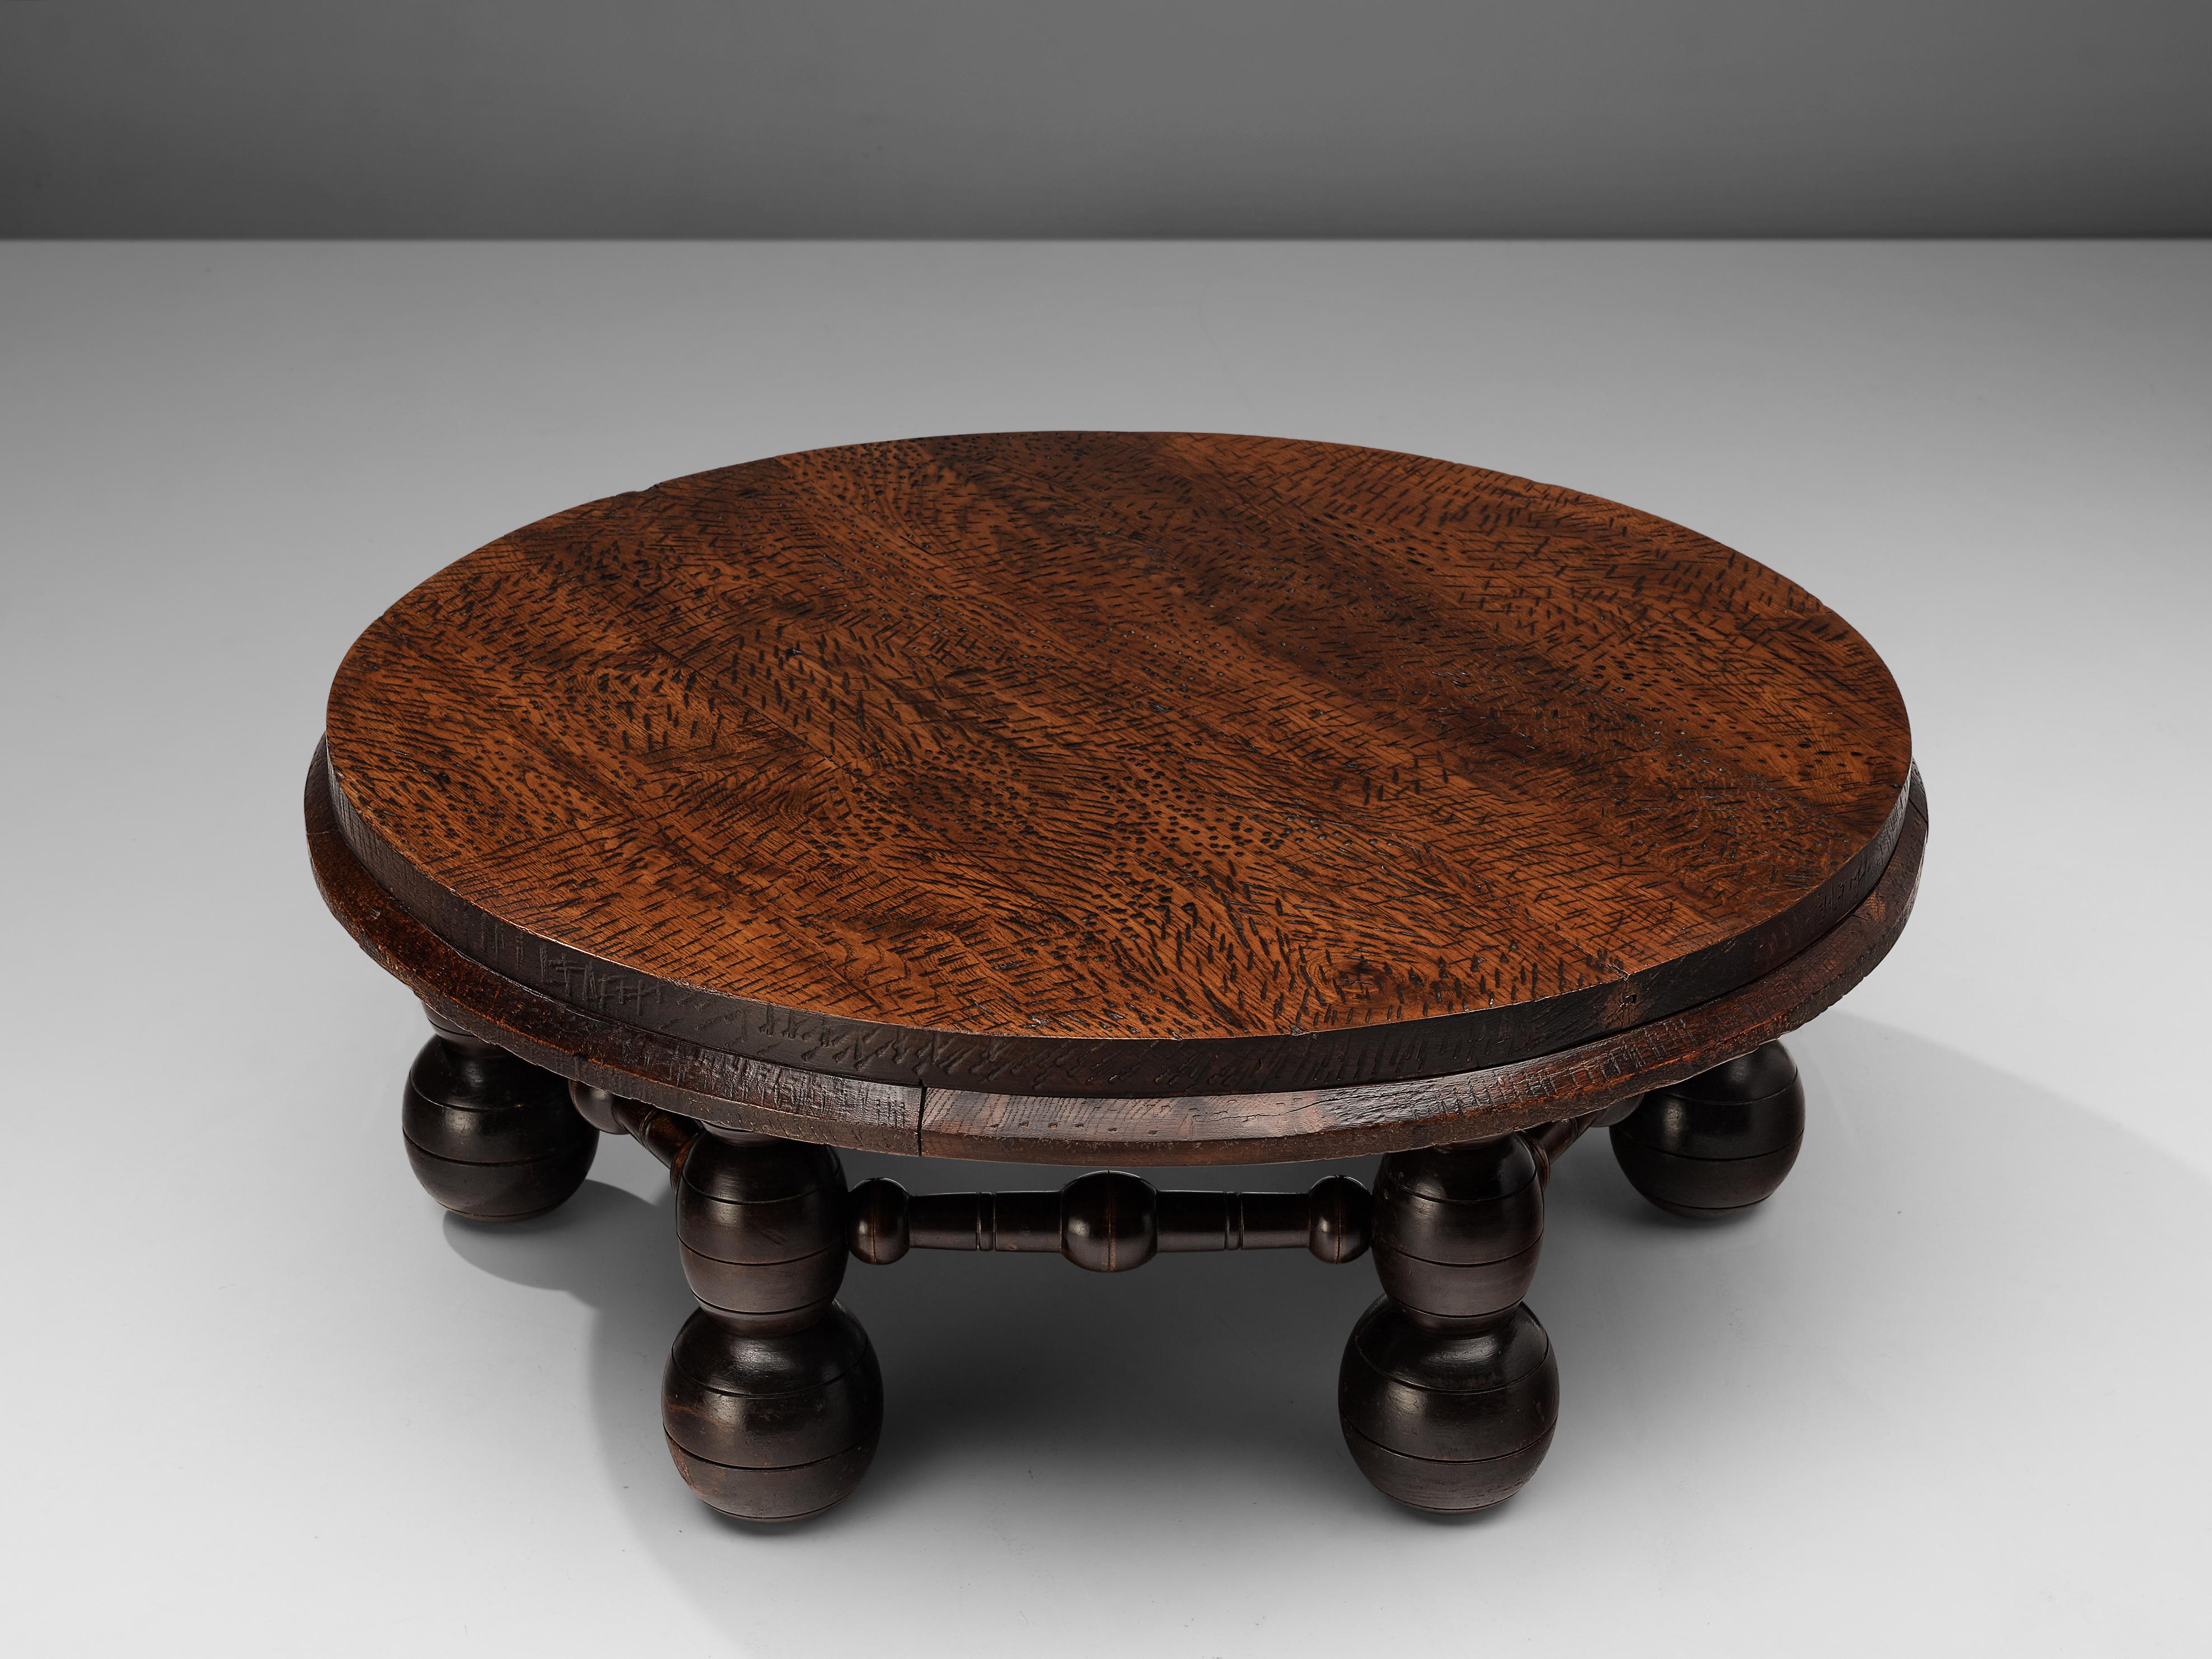 Side table, darkened oak, France, 1930s

This robust side table is attributed to French designer Charles Dudouyt (1885-1946), and is made from dark stained solid oak. The round tabletop is chiselled with small cuts and dots. The signature ball feet,